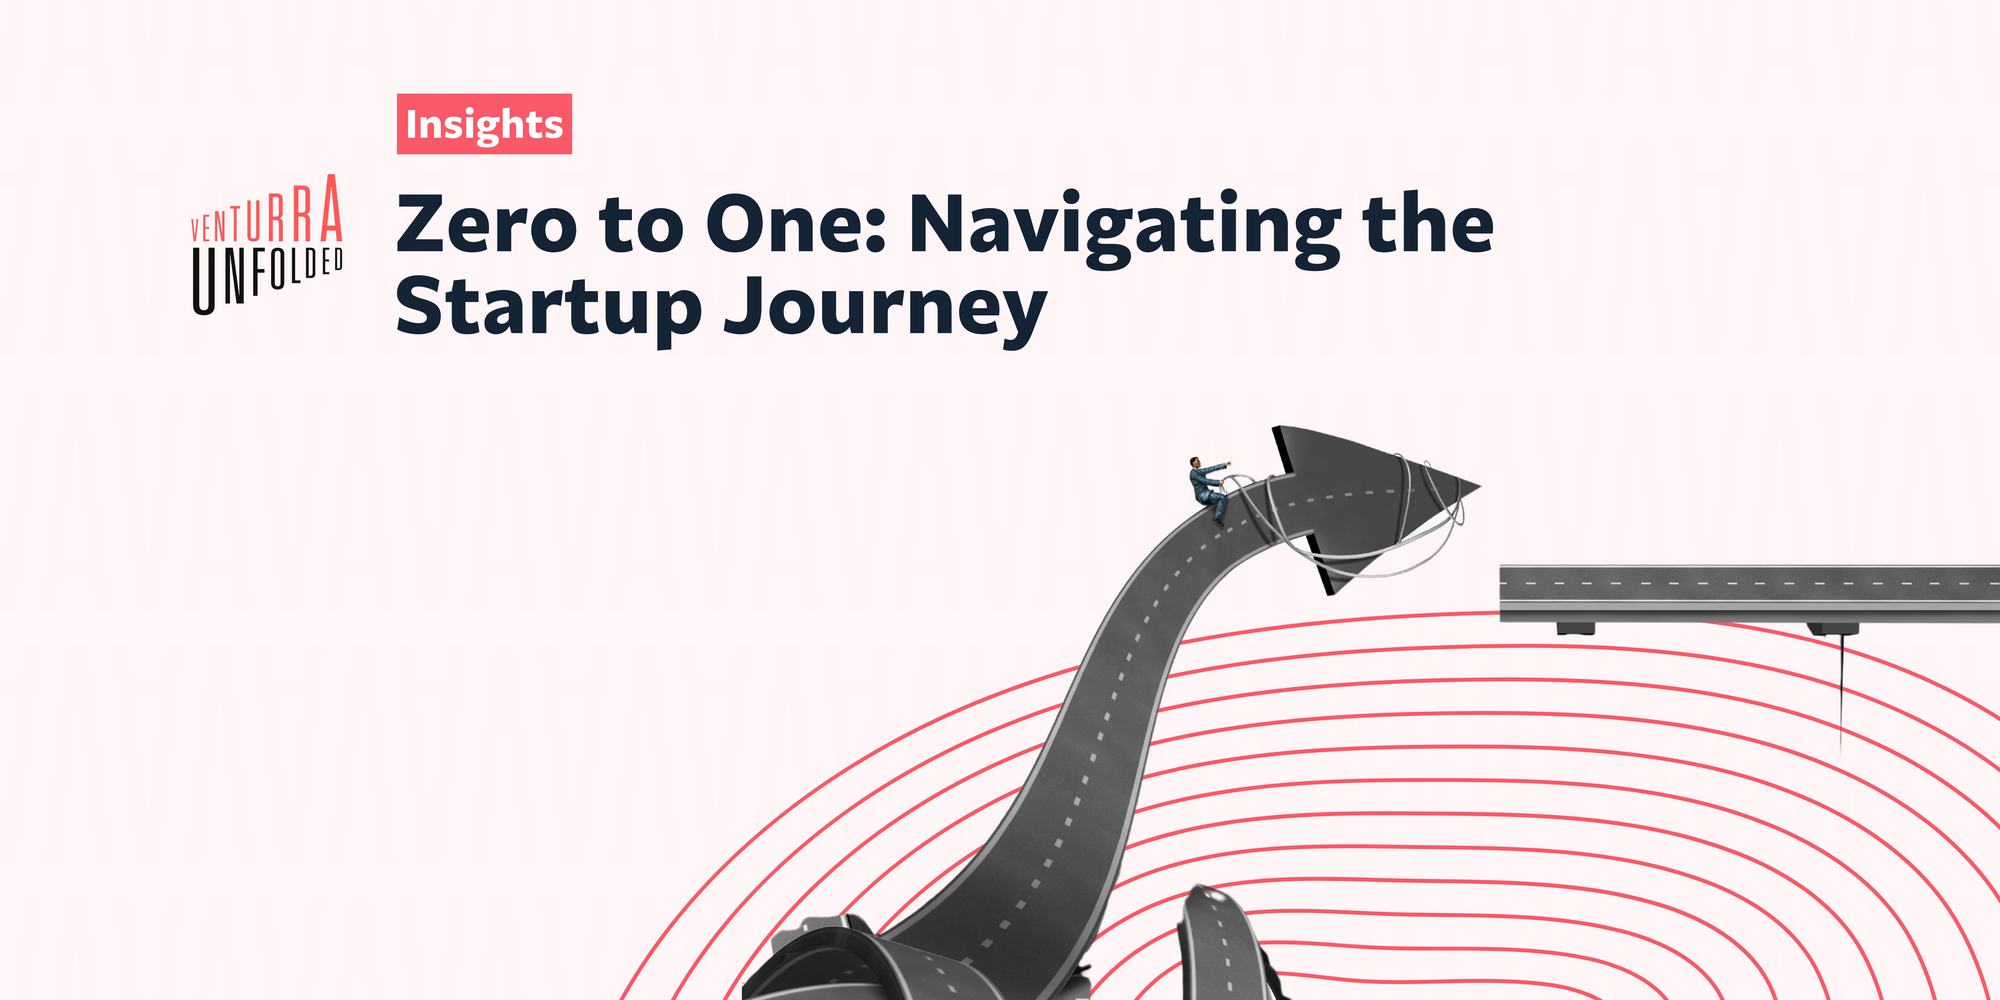 Zero to One: Navigating the Startup Journey from Inception to Breakthrough